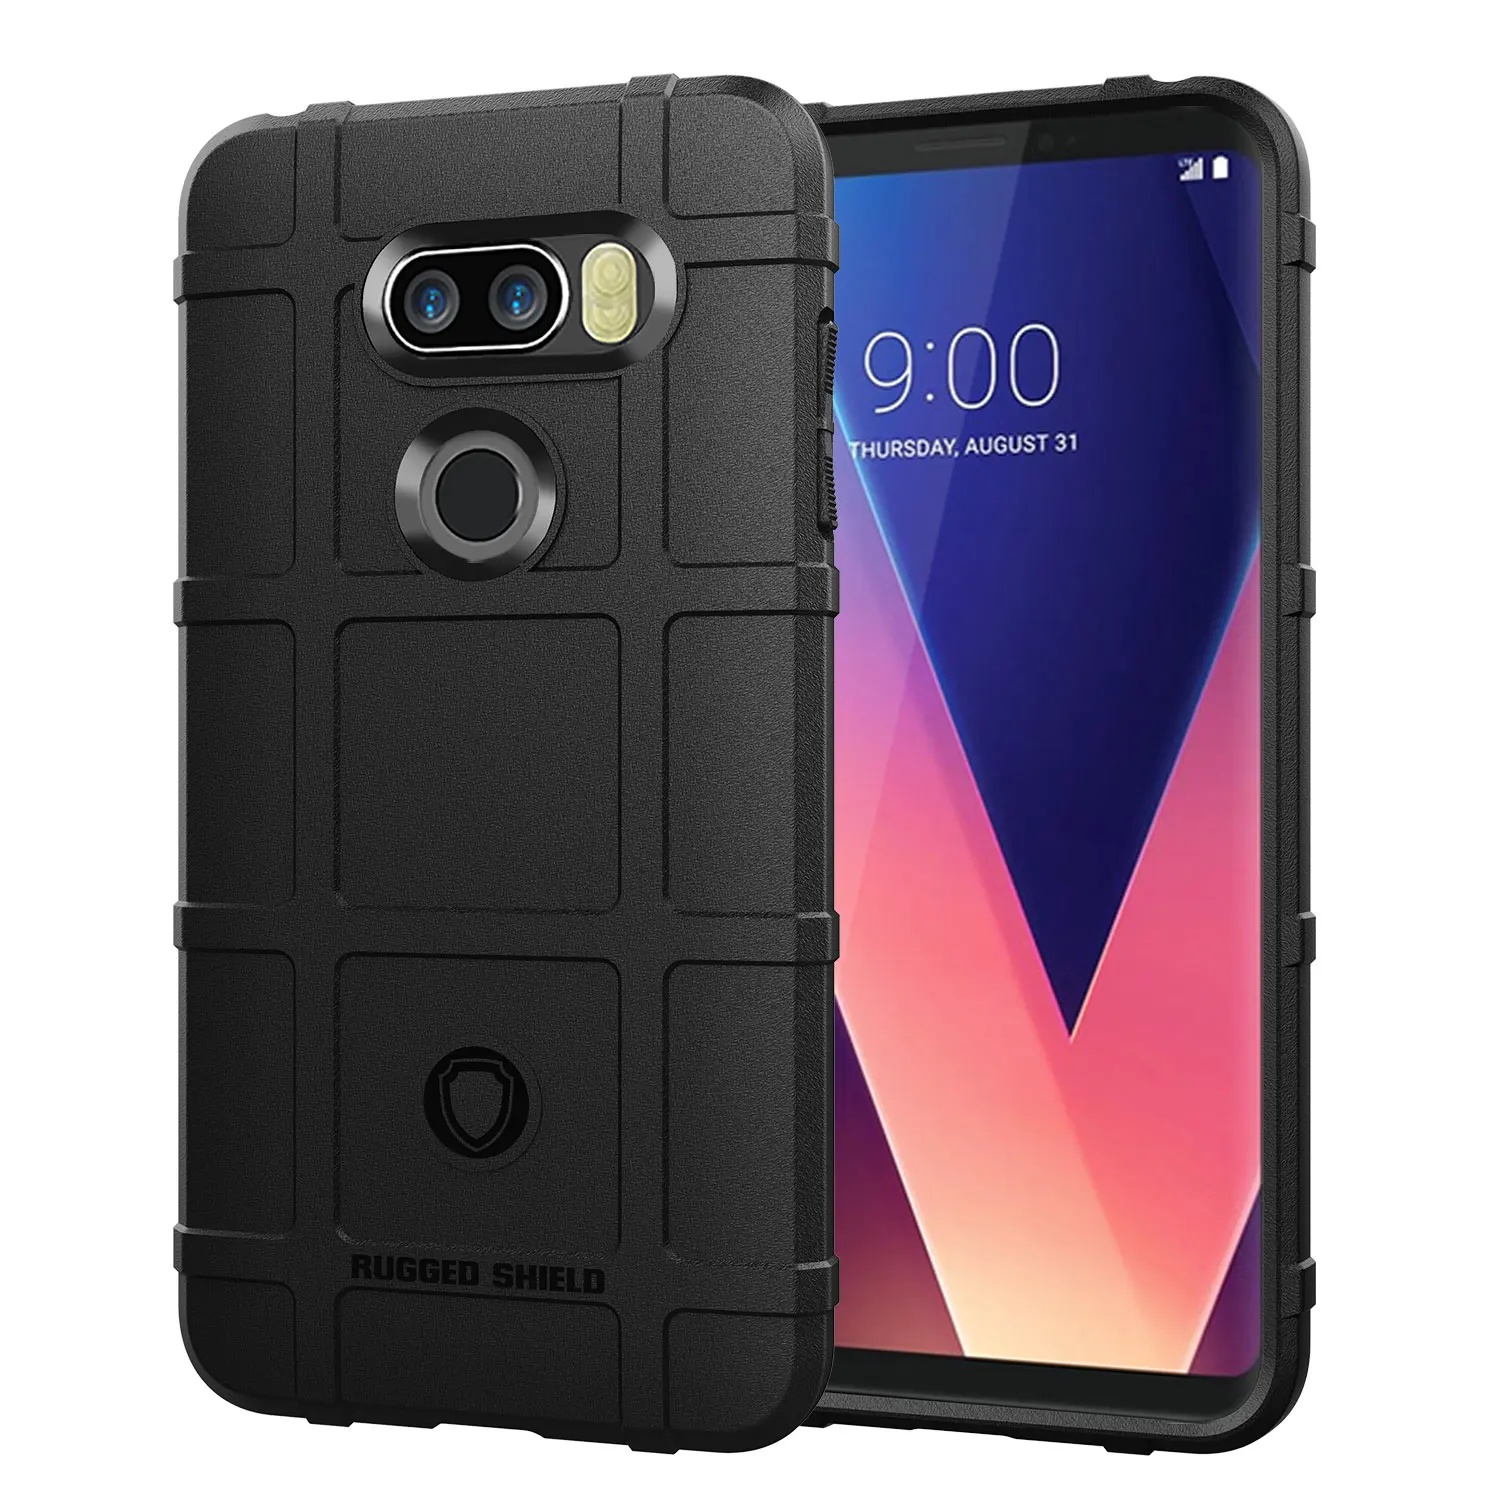 For LG V30 V30S Plus V40 V50 V50S V60 Thin Q Case Luxury Soft Silicone Phone Cover LG Stylo 5 Plus 6 7 Back Cases Coque